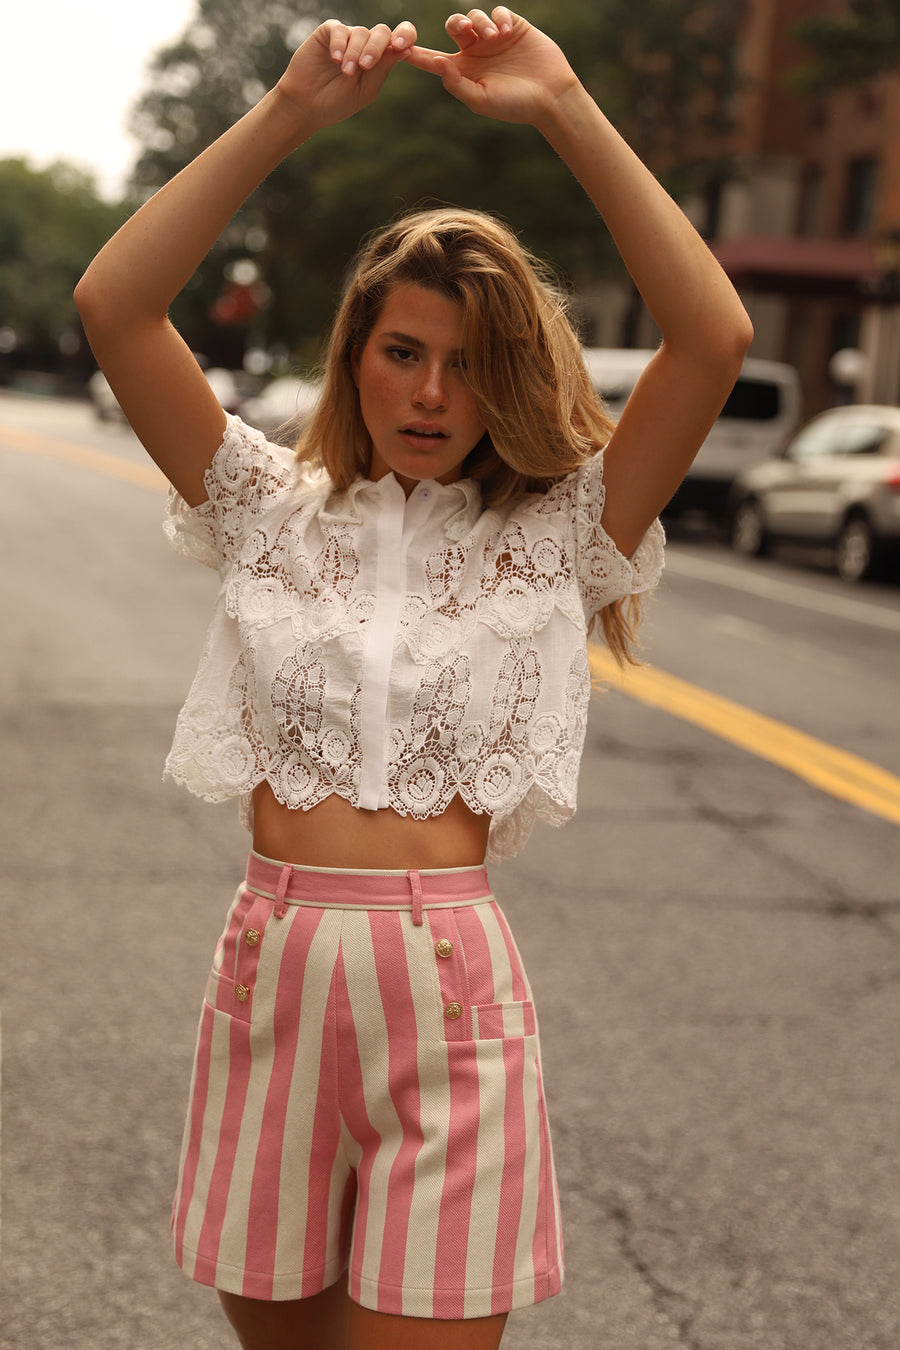 This is a photo of woman wearing a white lace crop top and pink striped shorts.